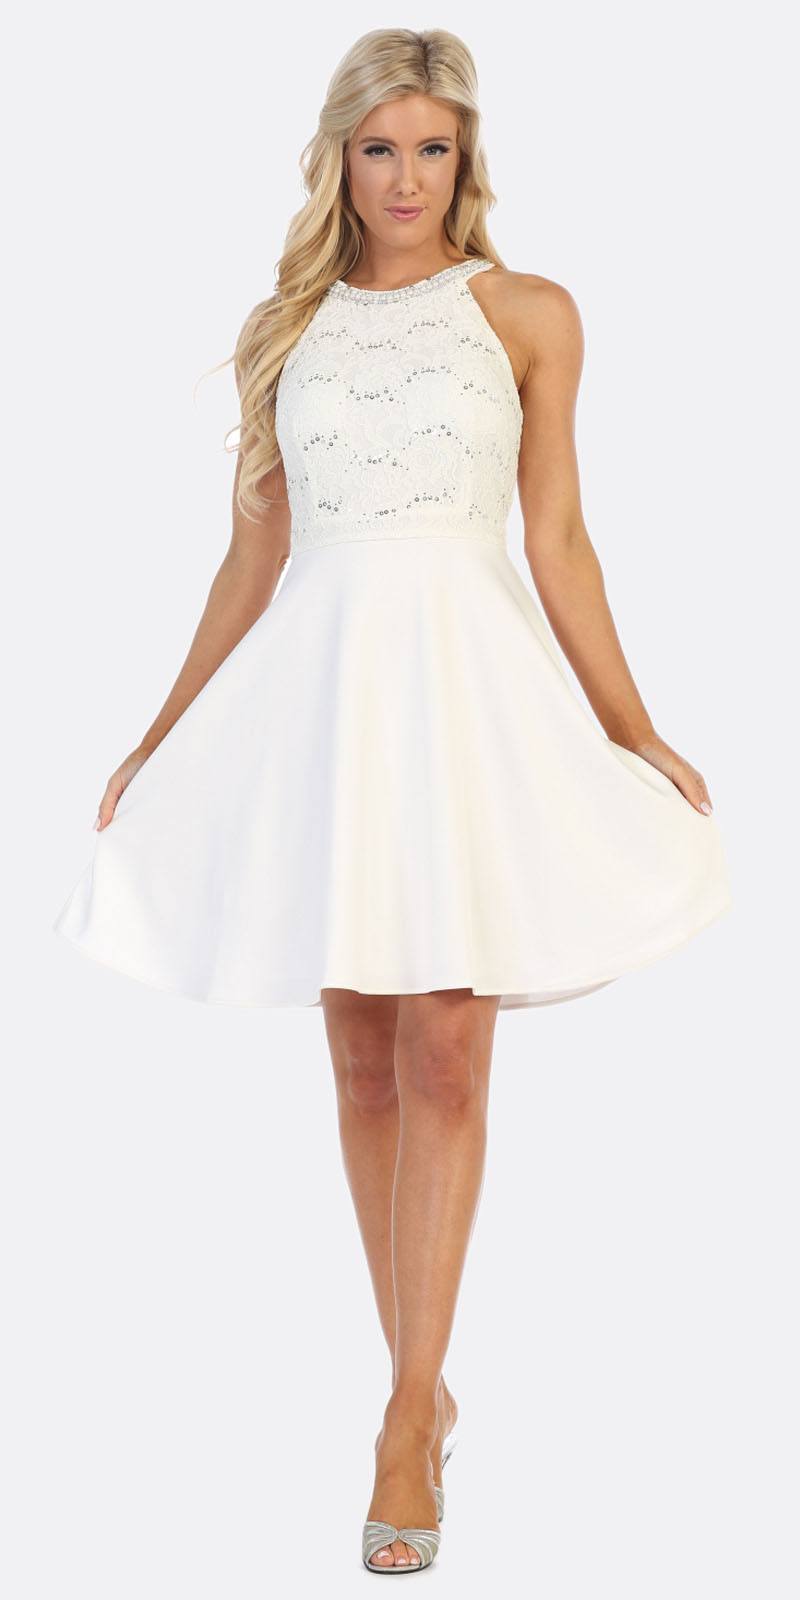 Celavie 6382 Off White Lace Top Knee-Length Cocktail Dress